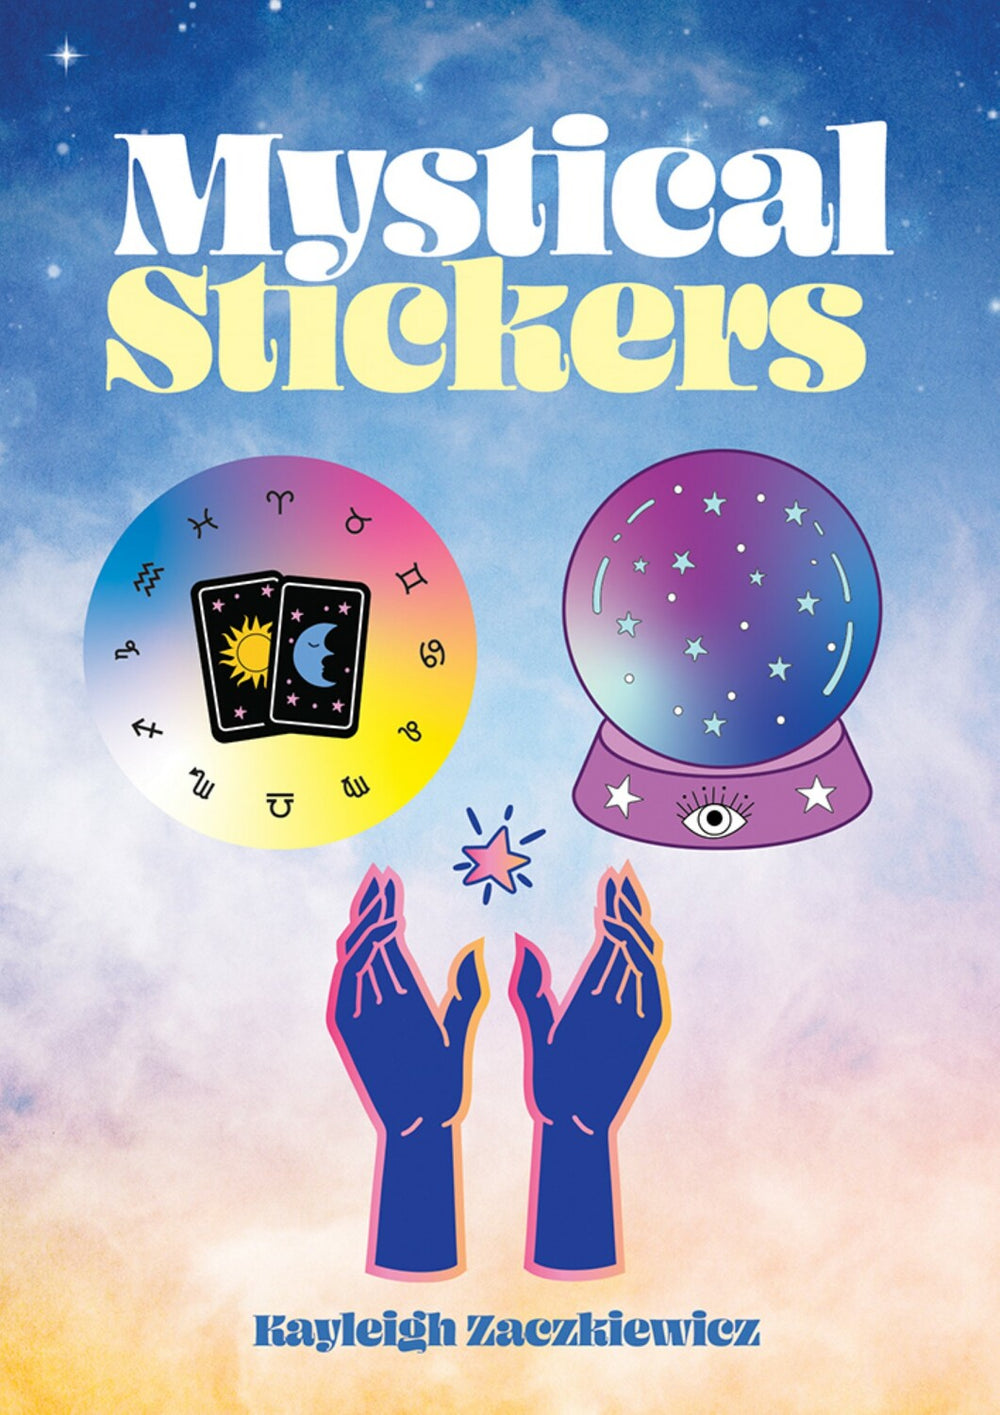 Mystical Stickers: 22 Stickers